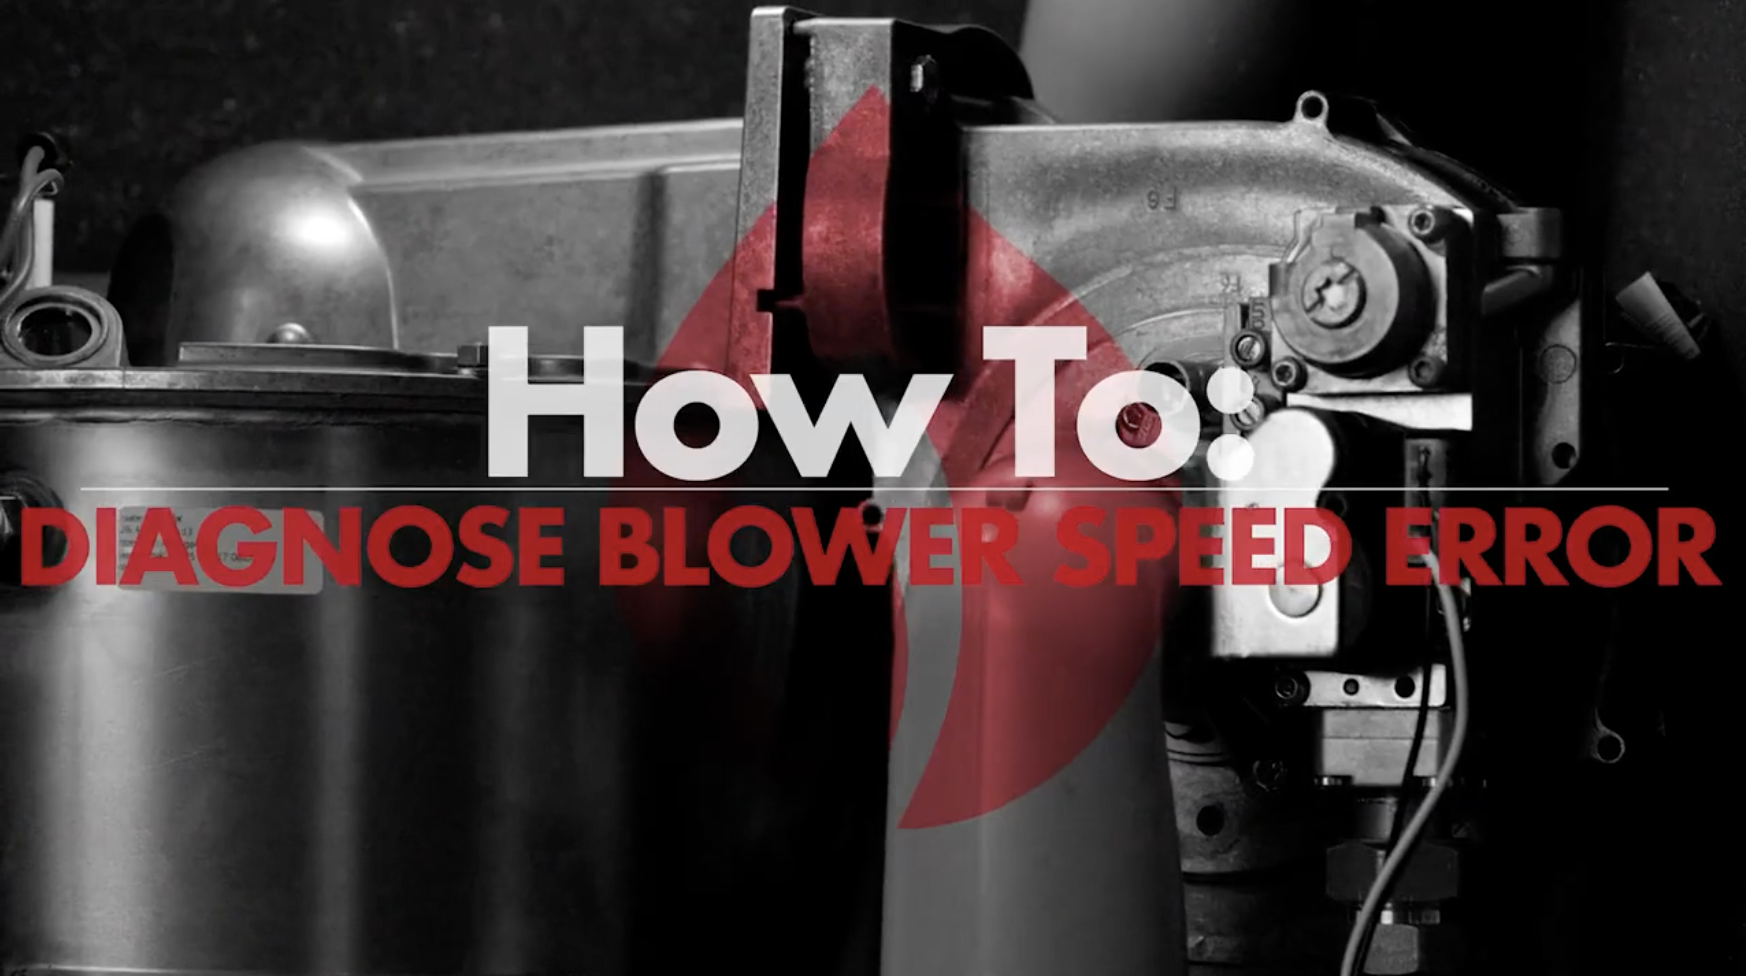 How To: Diagnose Blower Speed Error